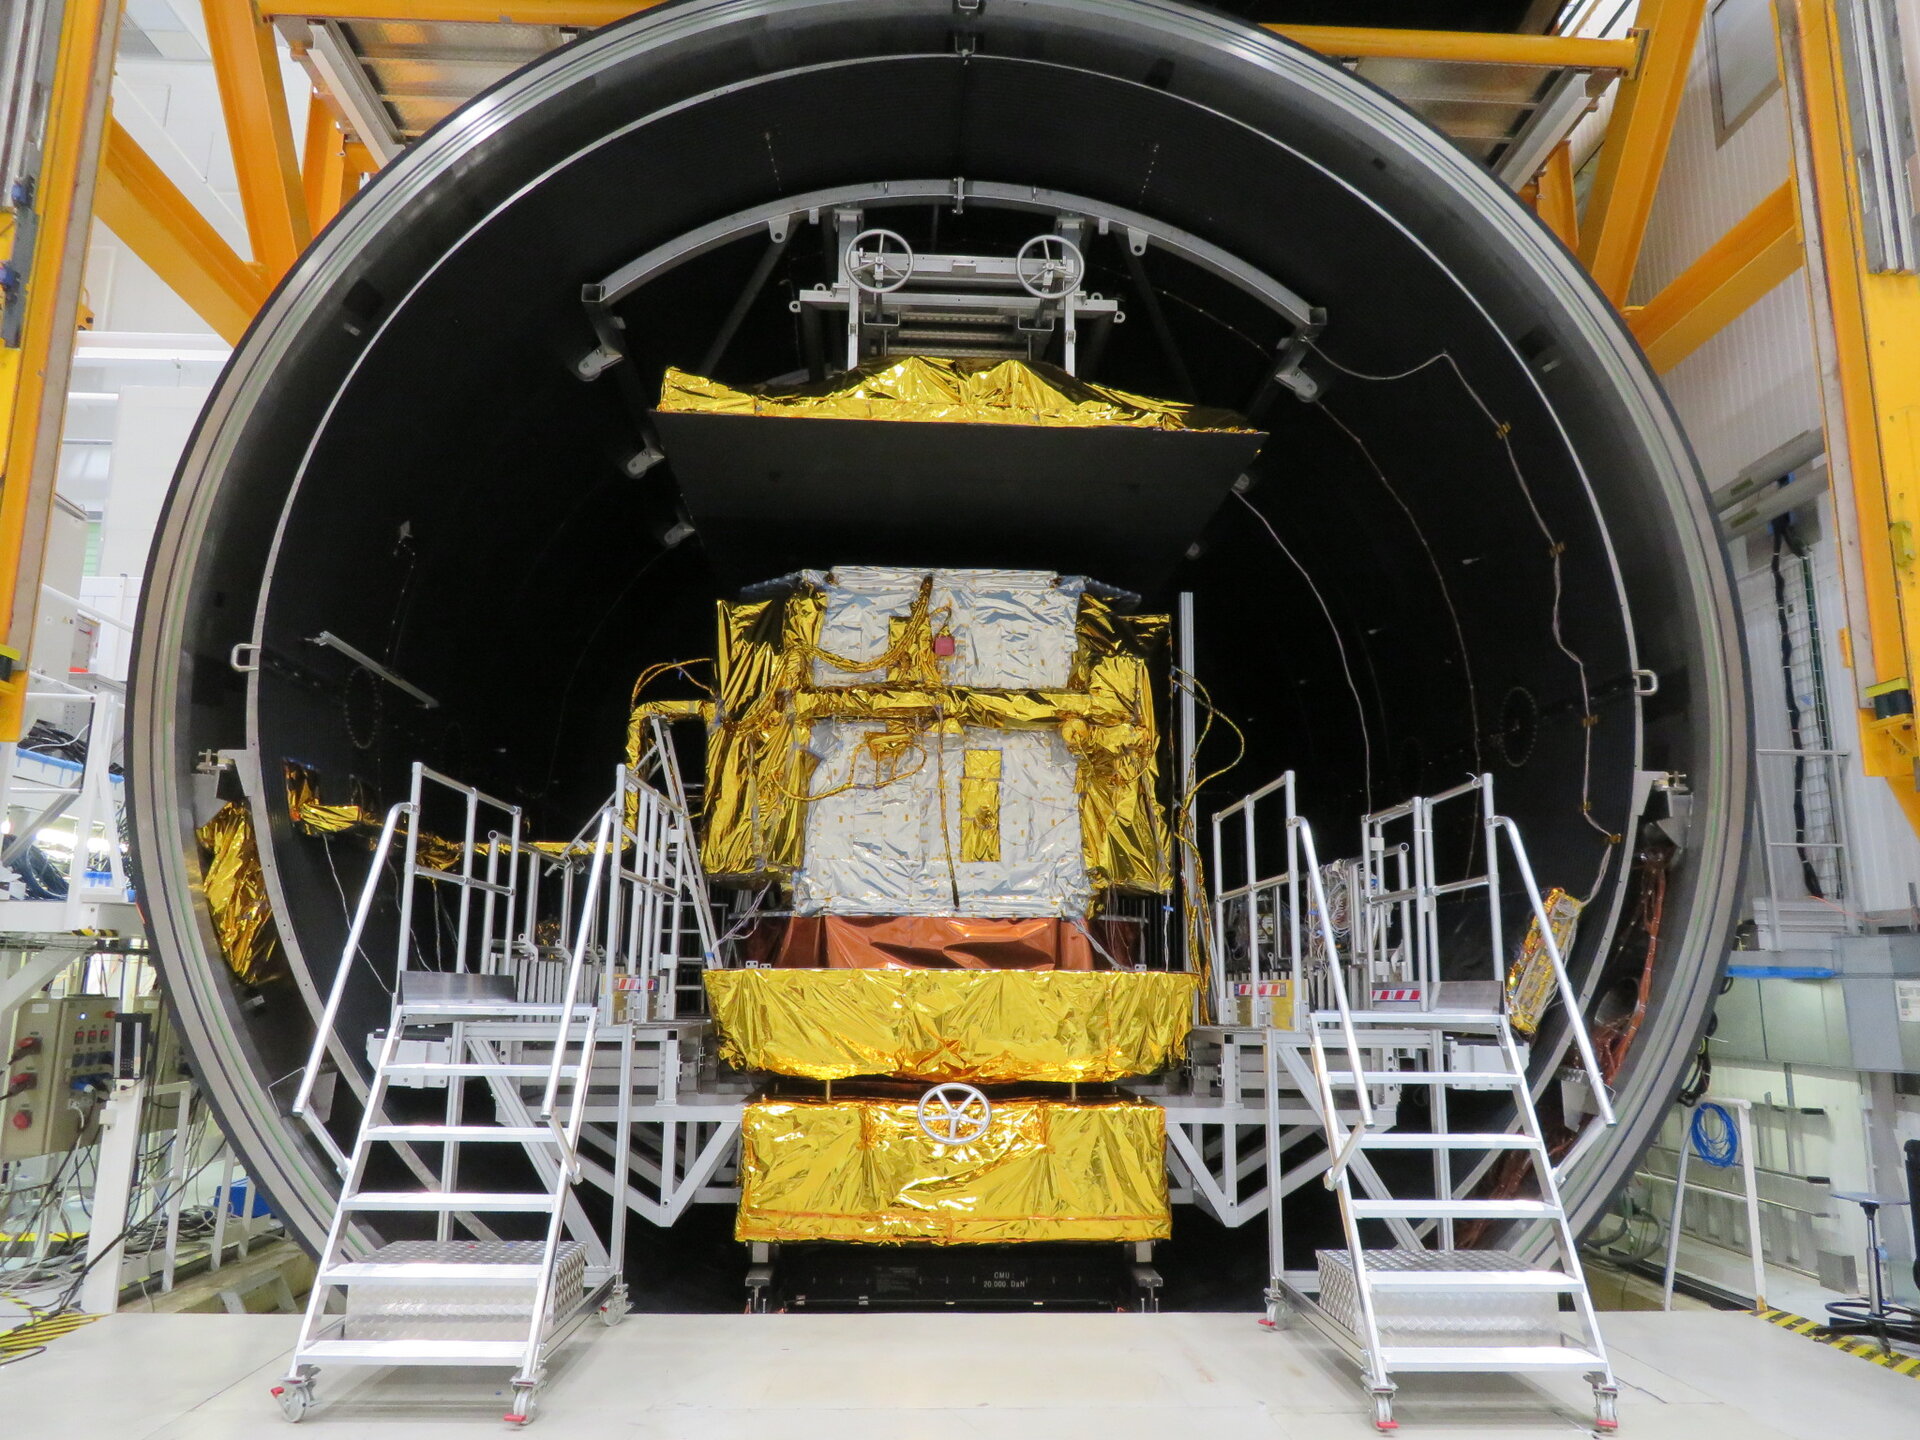 Konnect satellite in thermal vacuum test chamber